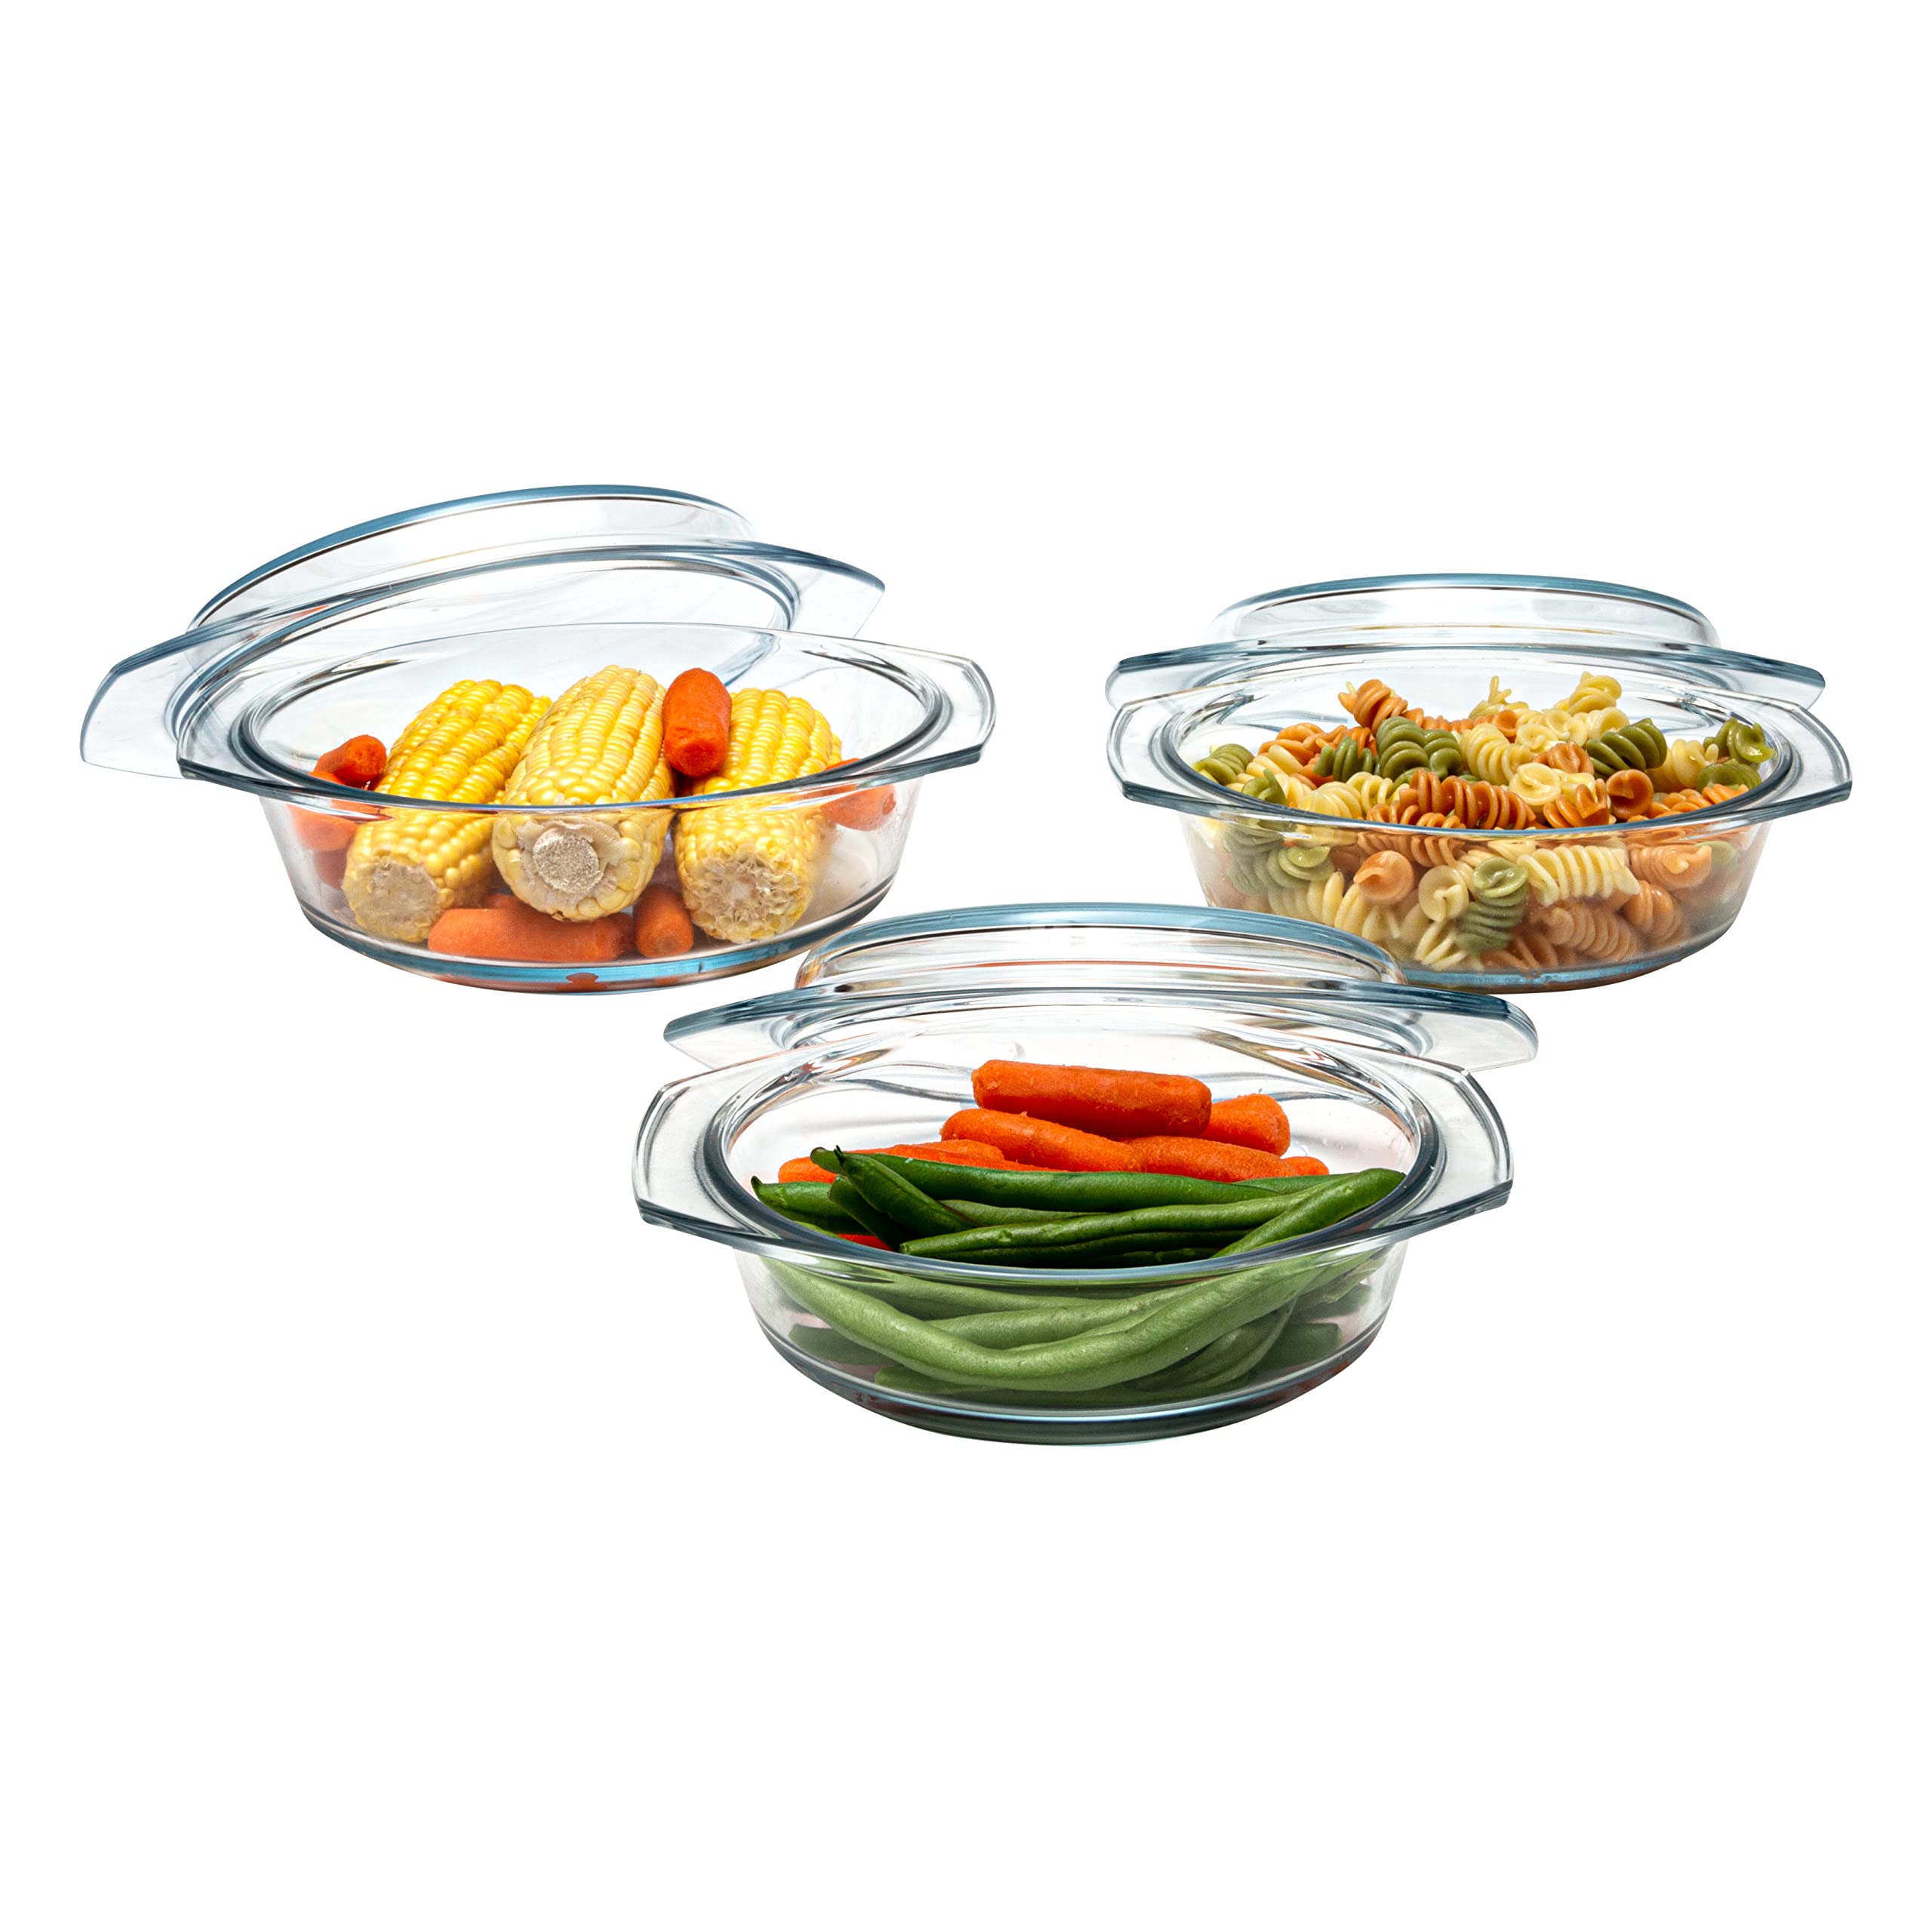 Simax Casserole Dish Set, Set of 3 Casserole Dish with Lid, Round Glass Cookware, Borosilicate Glass, Made In Europe 0.75 Quart, 1 Quart and 1.5 Quart Baking Dishes…